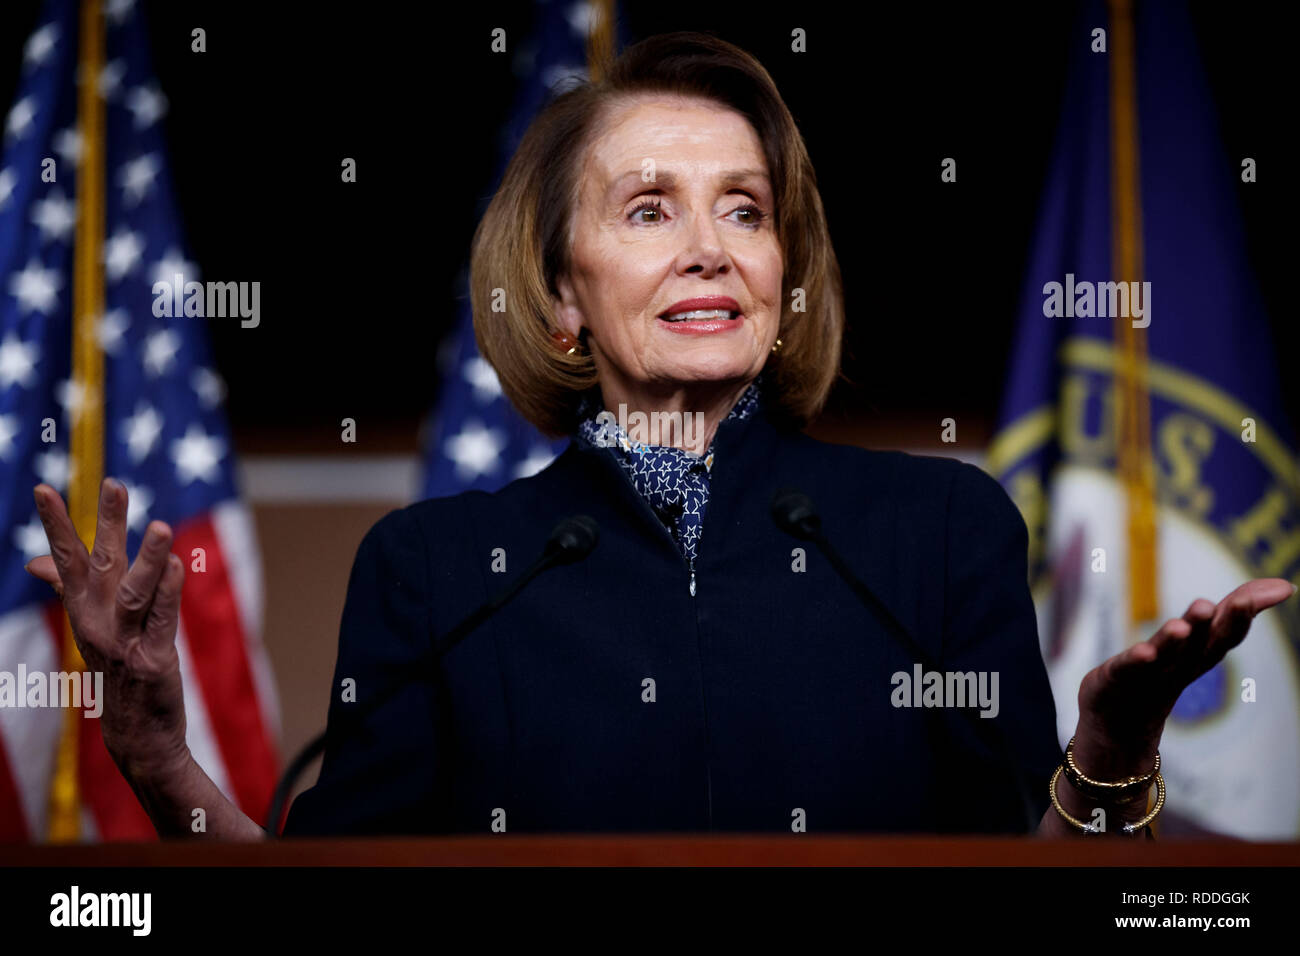 Washington D. C. 13th Dec, 2018. This file photo taken on Dec. 13, 2018 shows Nancy Pelosi speaking during a press conference on Capitol Hill in Washington, DC, the United States. U.S. President Donald Trump on Thursday told Speaker Nancy Pelosi that her planned foreign trip has been postponed, one day after the top House Democrat asked him to delay the State of the Union address due to the ongoing partial government shutdown. Credit: Ting Shen/Xinhua/Alamy Live News Stock Photo